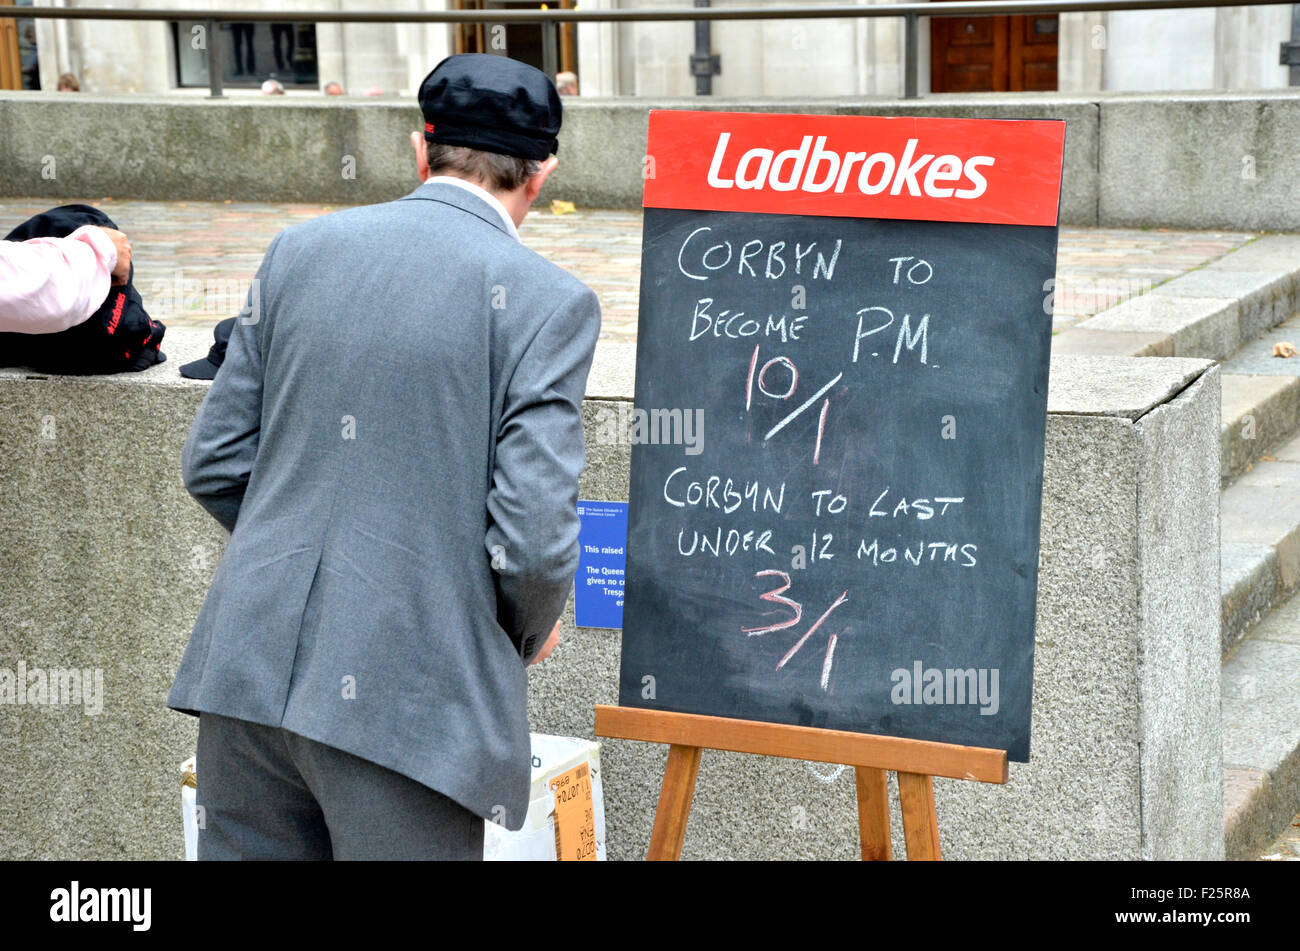 London, UK. 12th Sep, 2015. Crowds gather outside the Queen Elizabeth II Conference Centre in Westminster for the result of the Labour Party leadership Election. Ladbrooks bookmakers offering odds Credit:  PjrNews/Alamy Live News Stock Photo